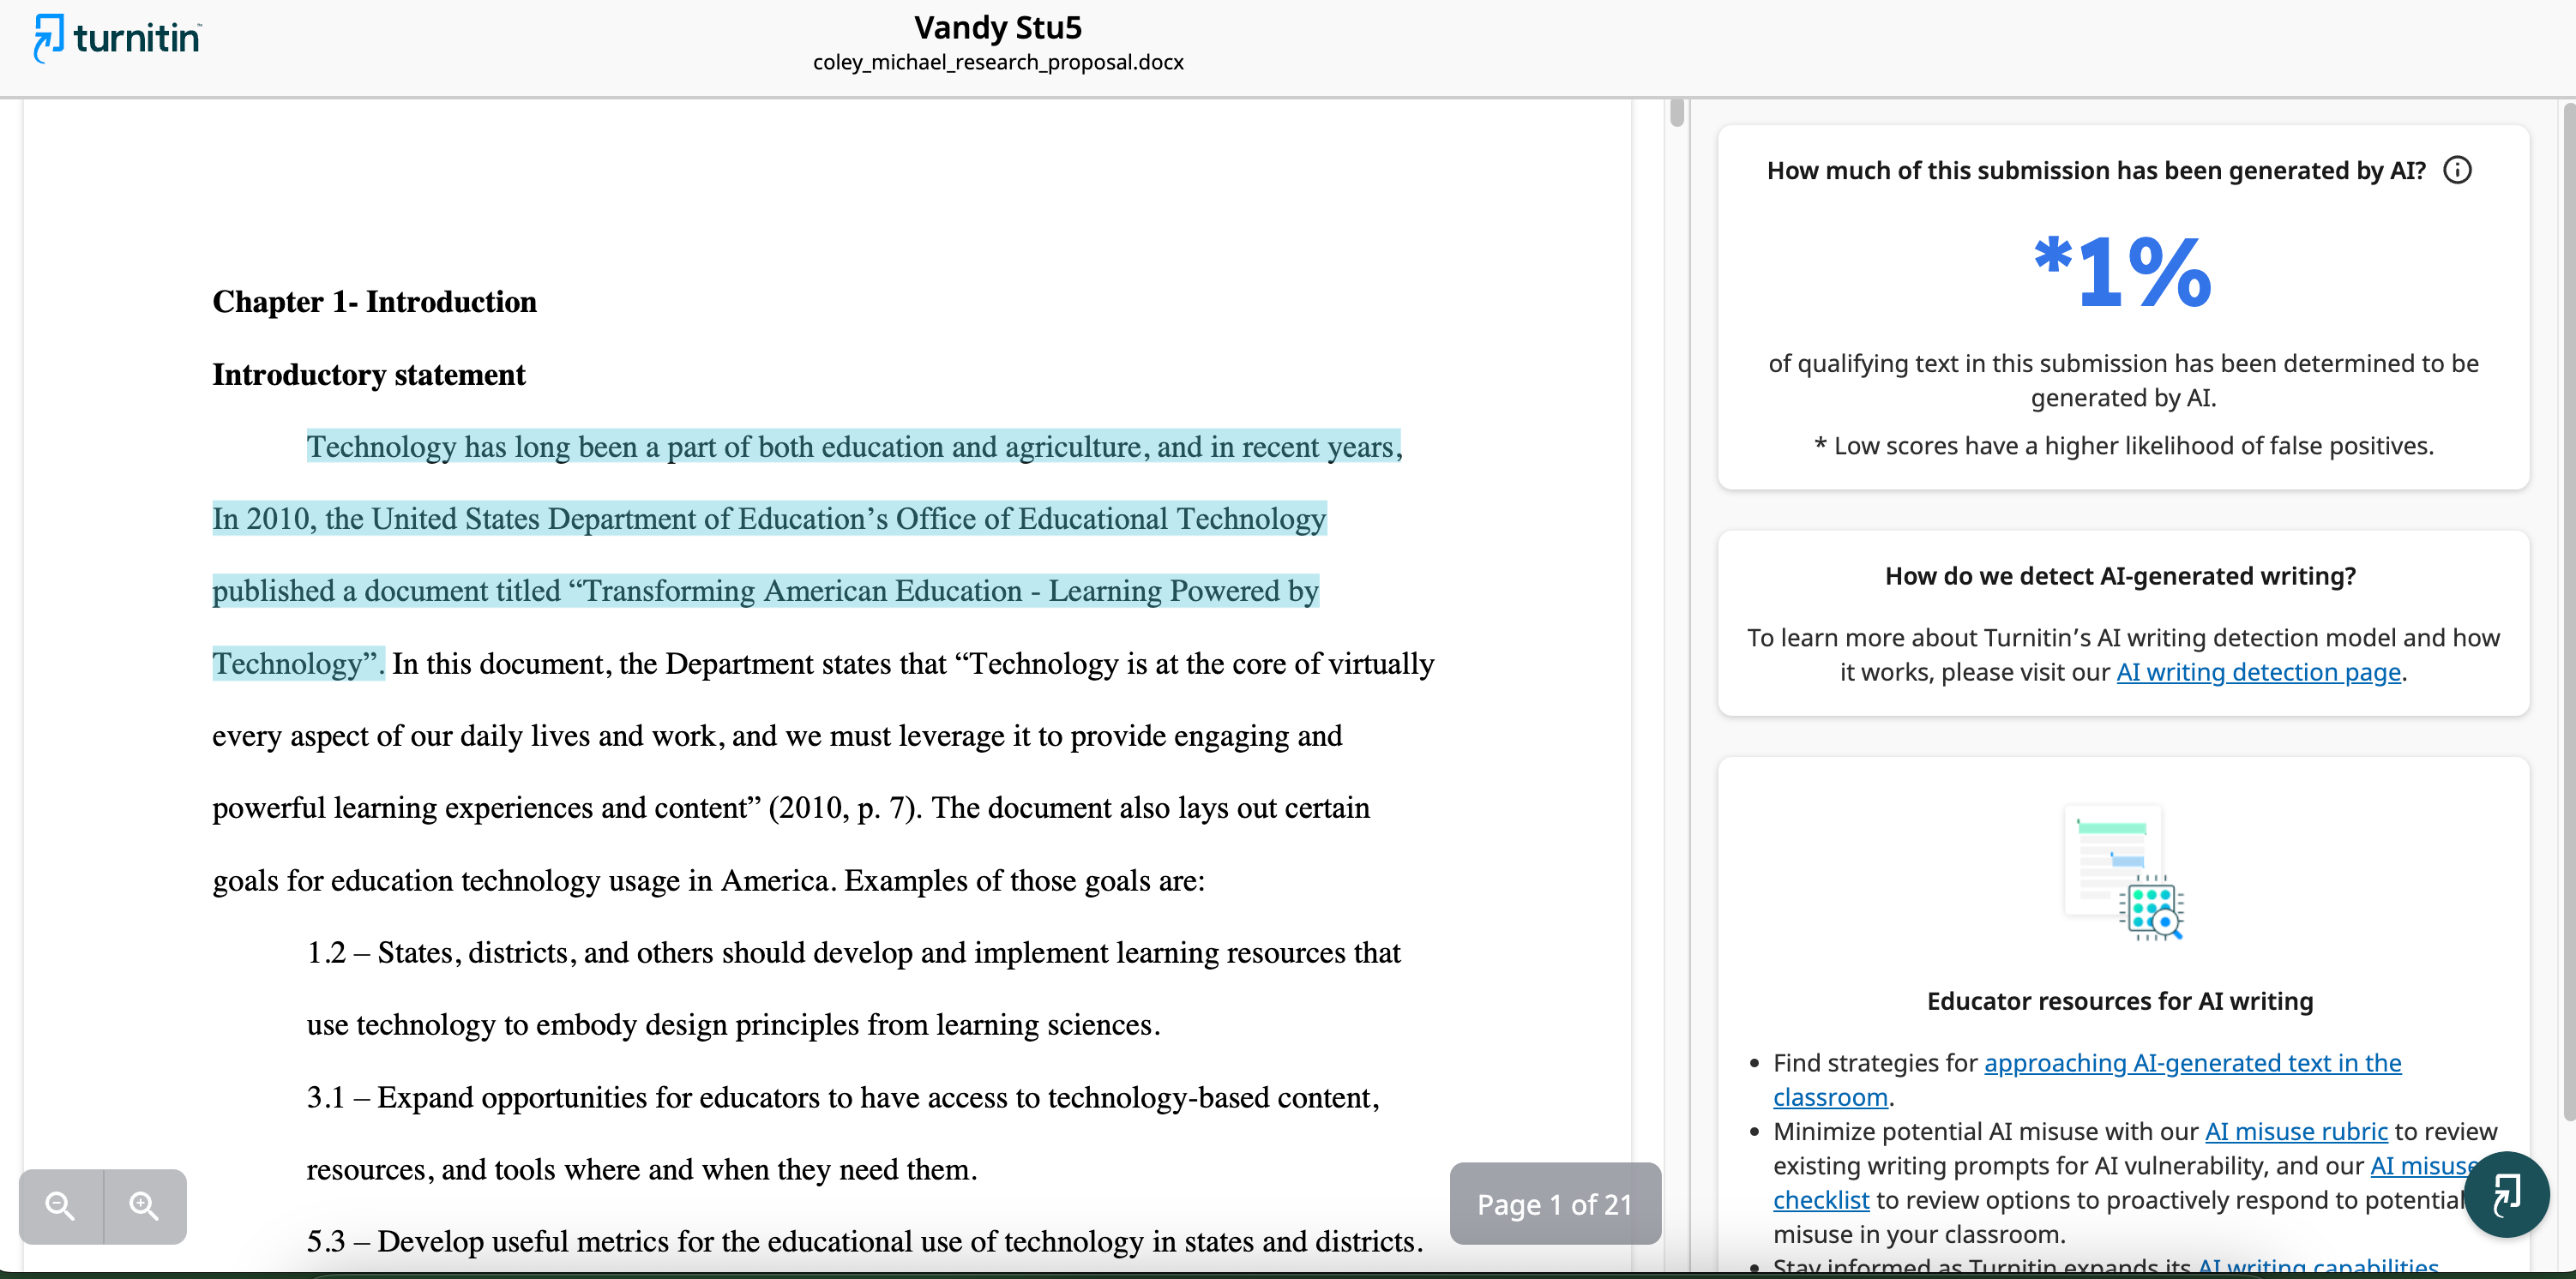 turnitin detect essays bought online